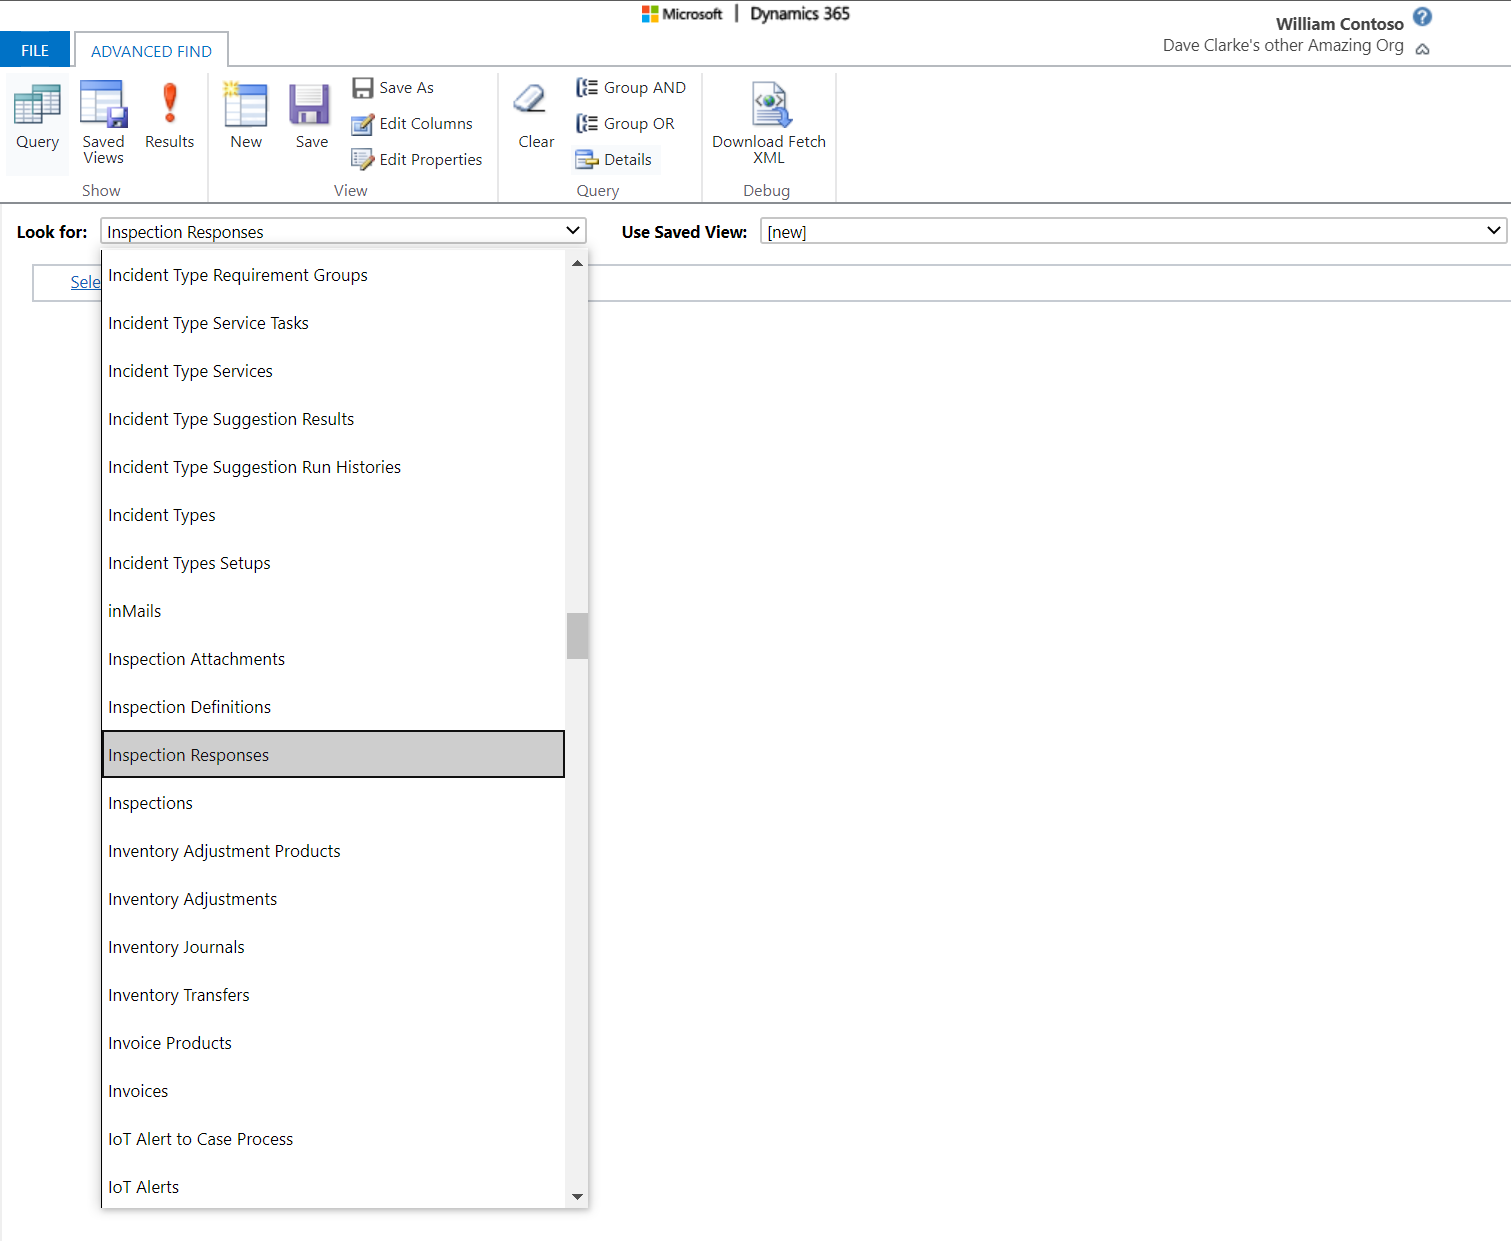 Screenshot of inspection responses showing up in the lookup dropdown in an advanced find window.